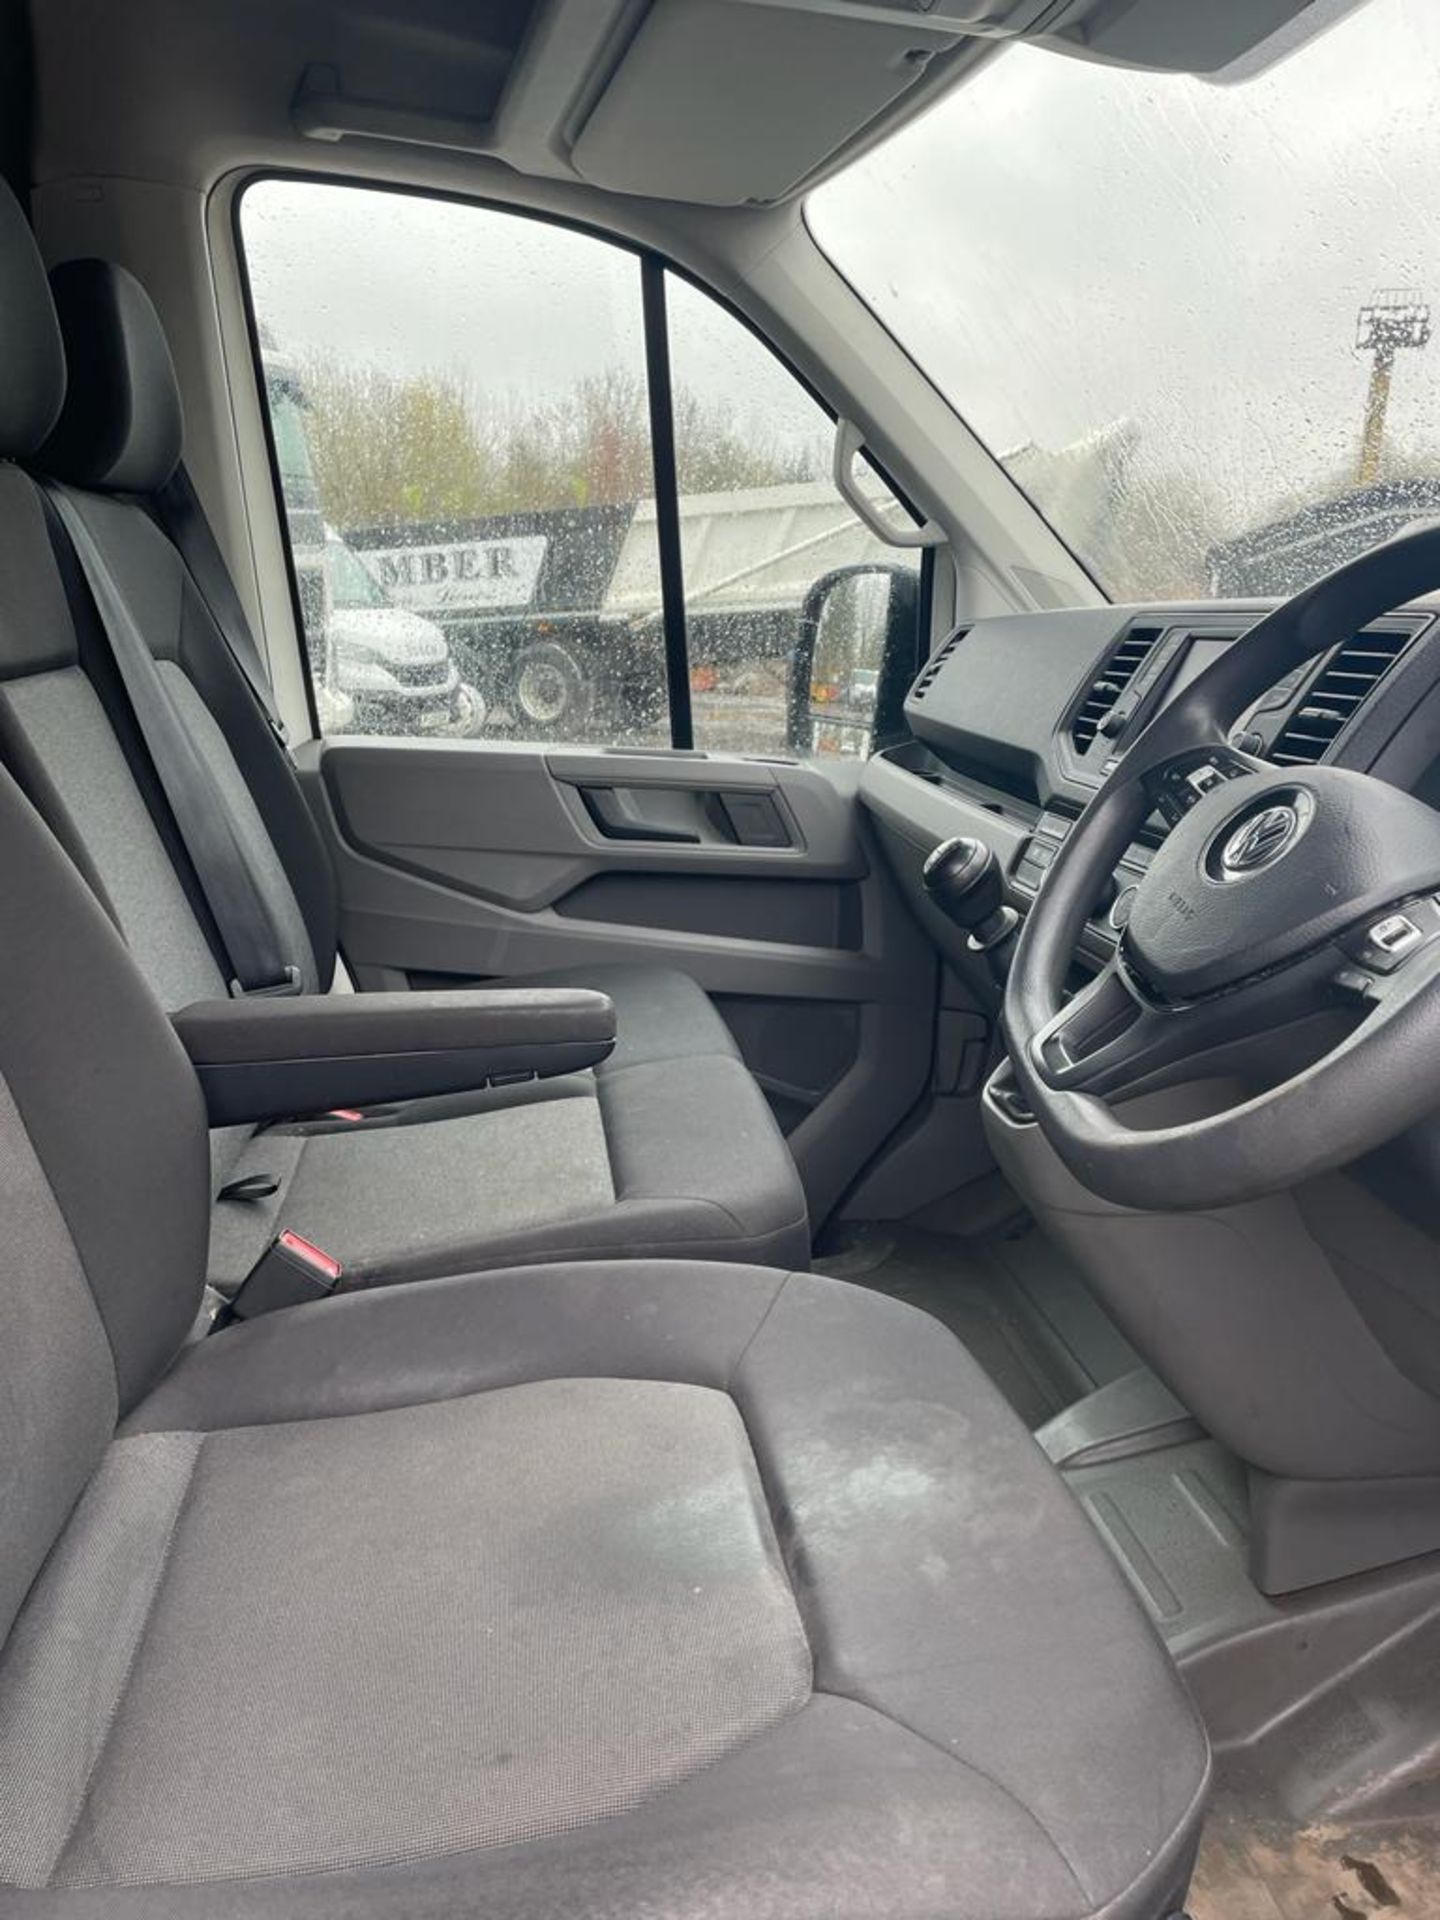 2019, Volkswagen Crafter CR35 TDI Blue Motion - Euro 6 ULEZ Compliant - Image 6 of 8